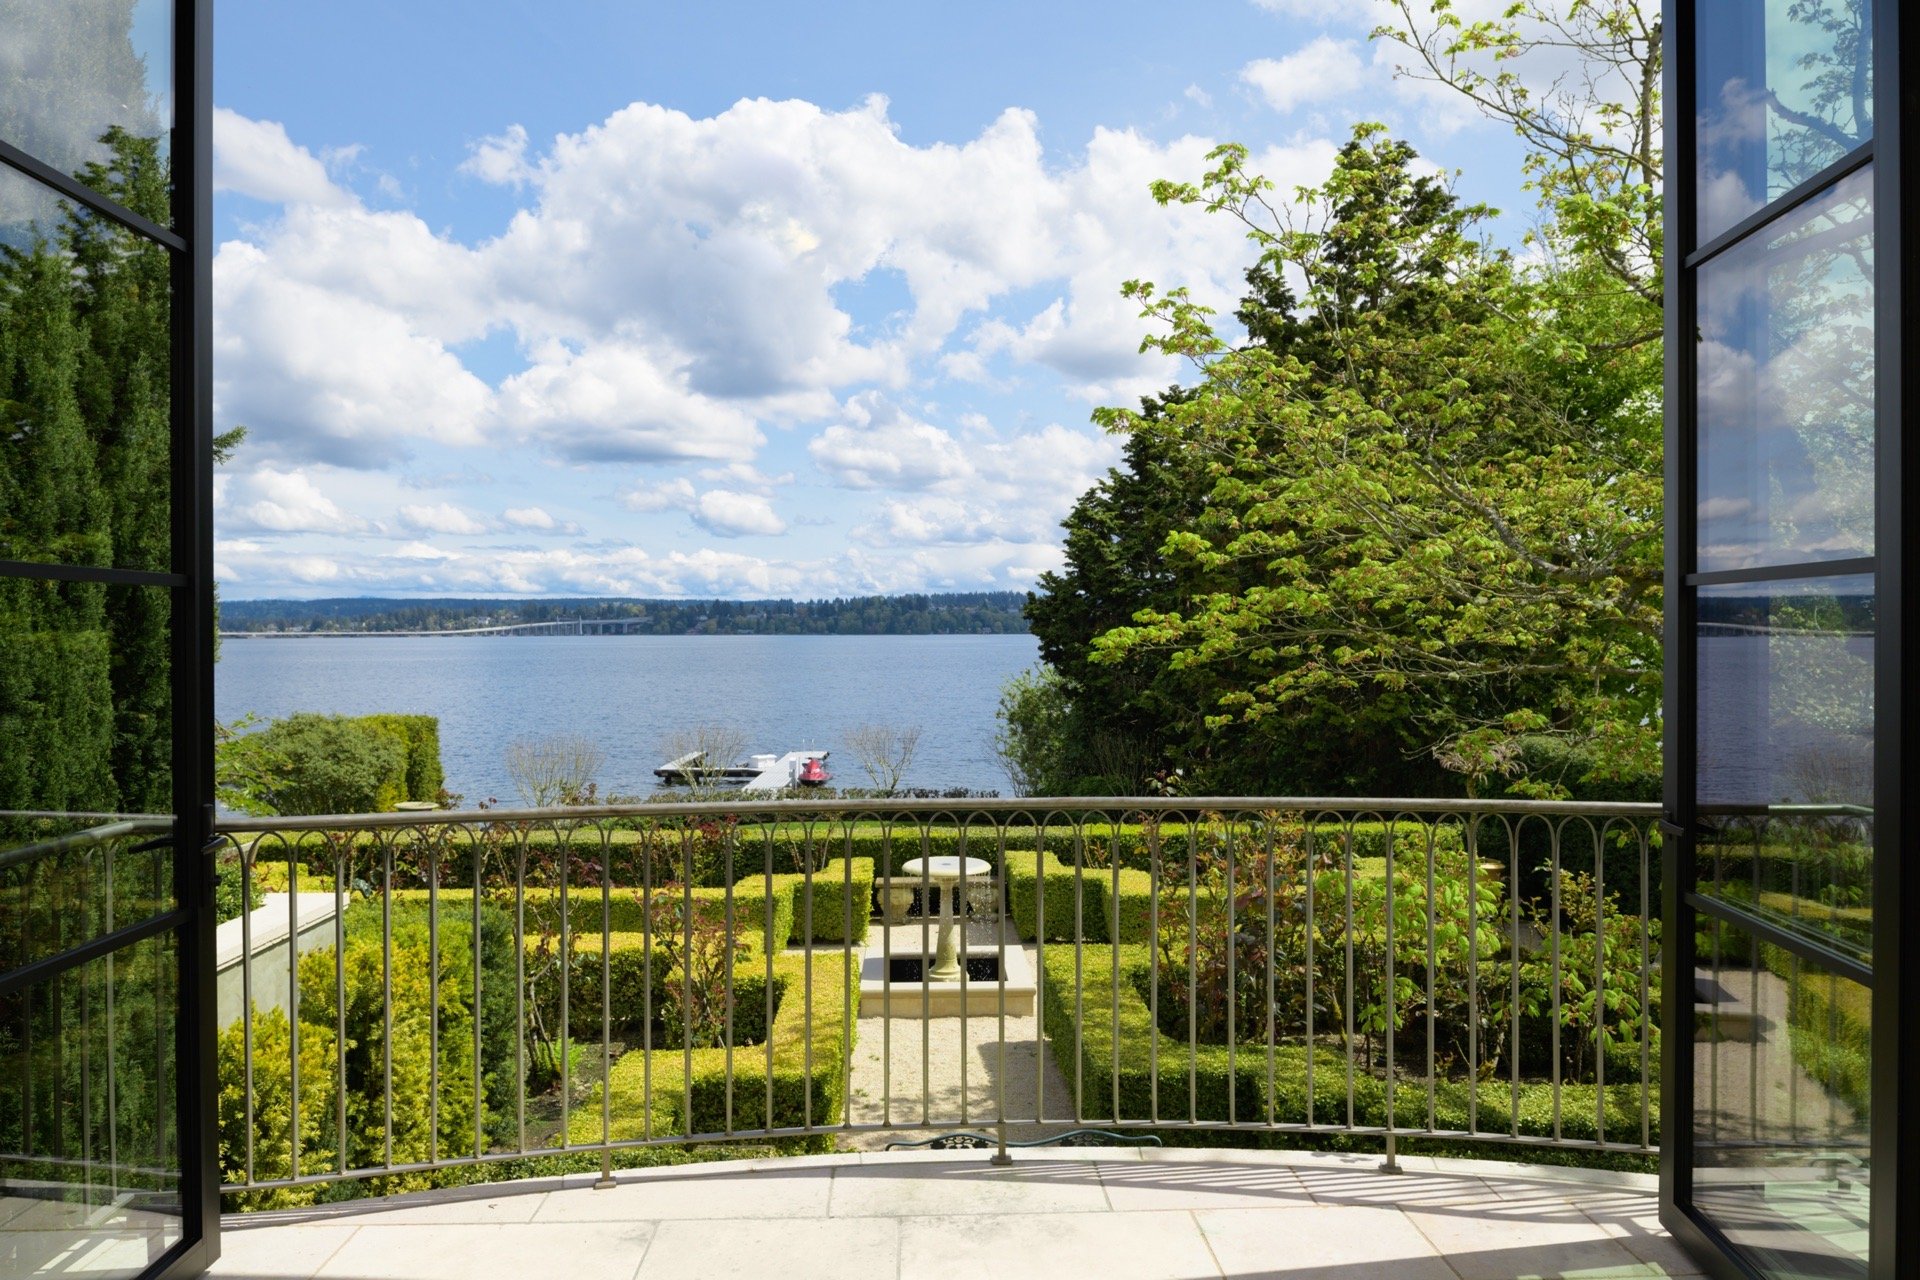 Francis York Waterfront Mansion in Seattle’s Exclusive Enclave, The Reed Estate 18.jpg